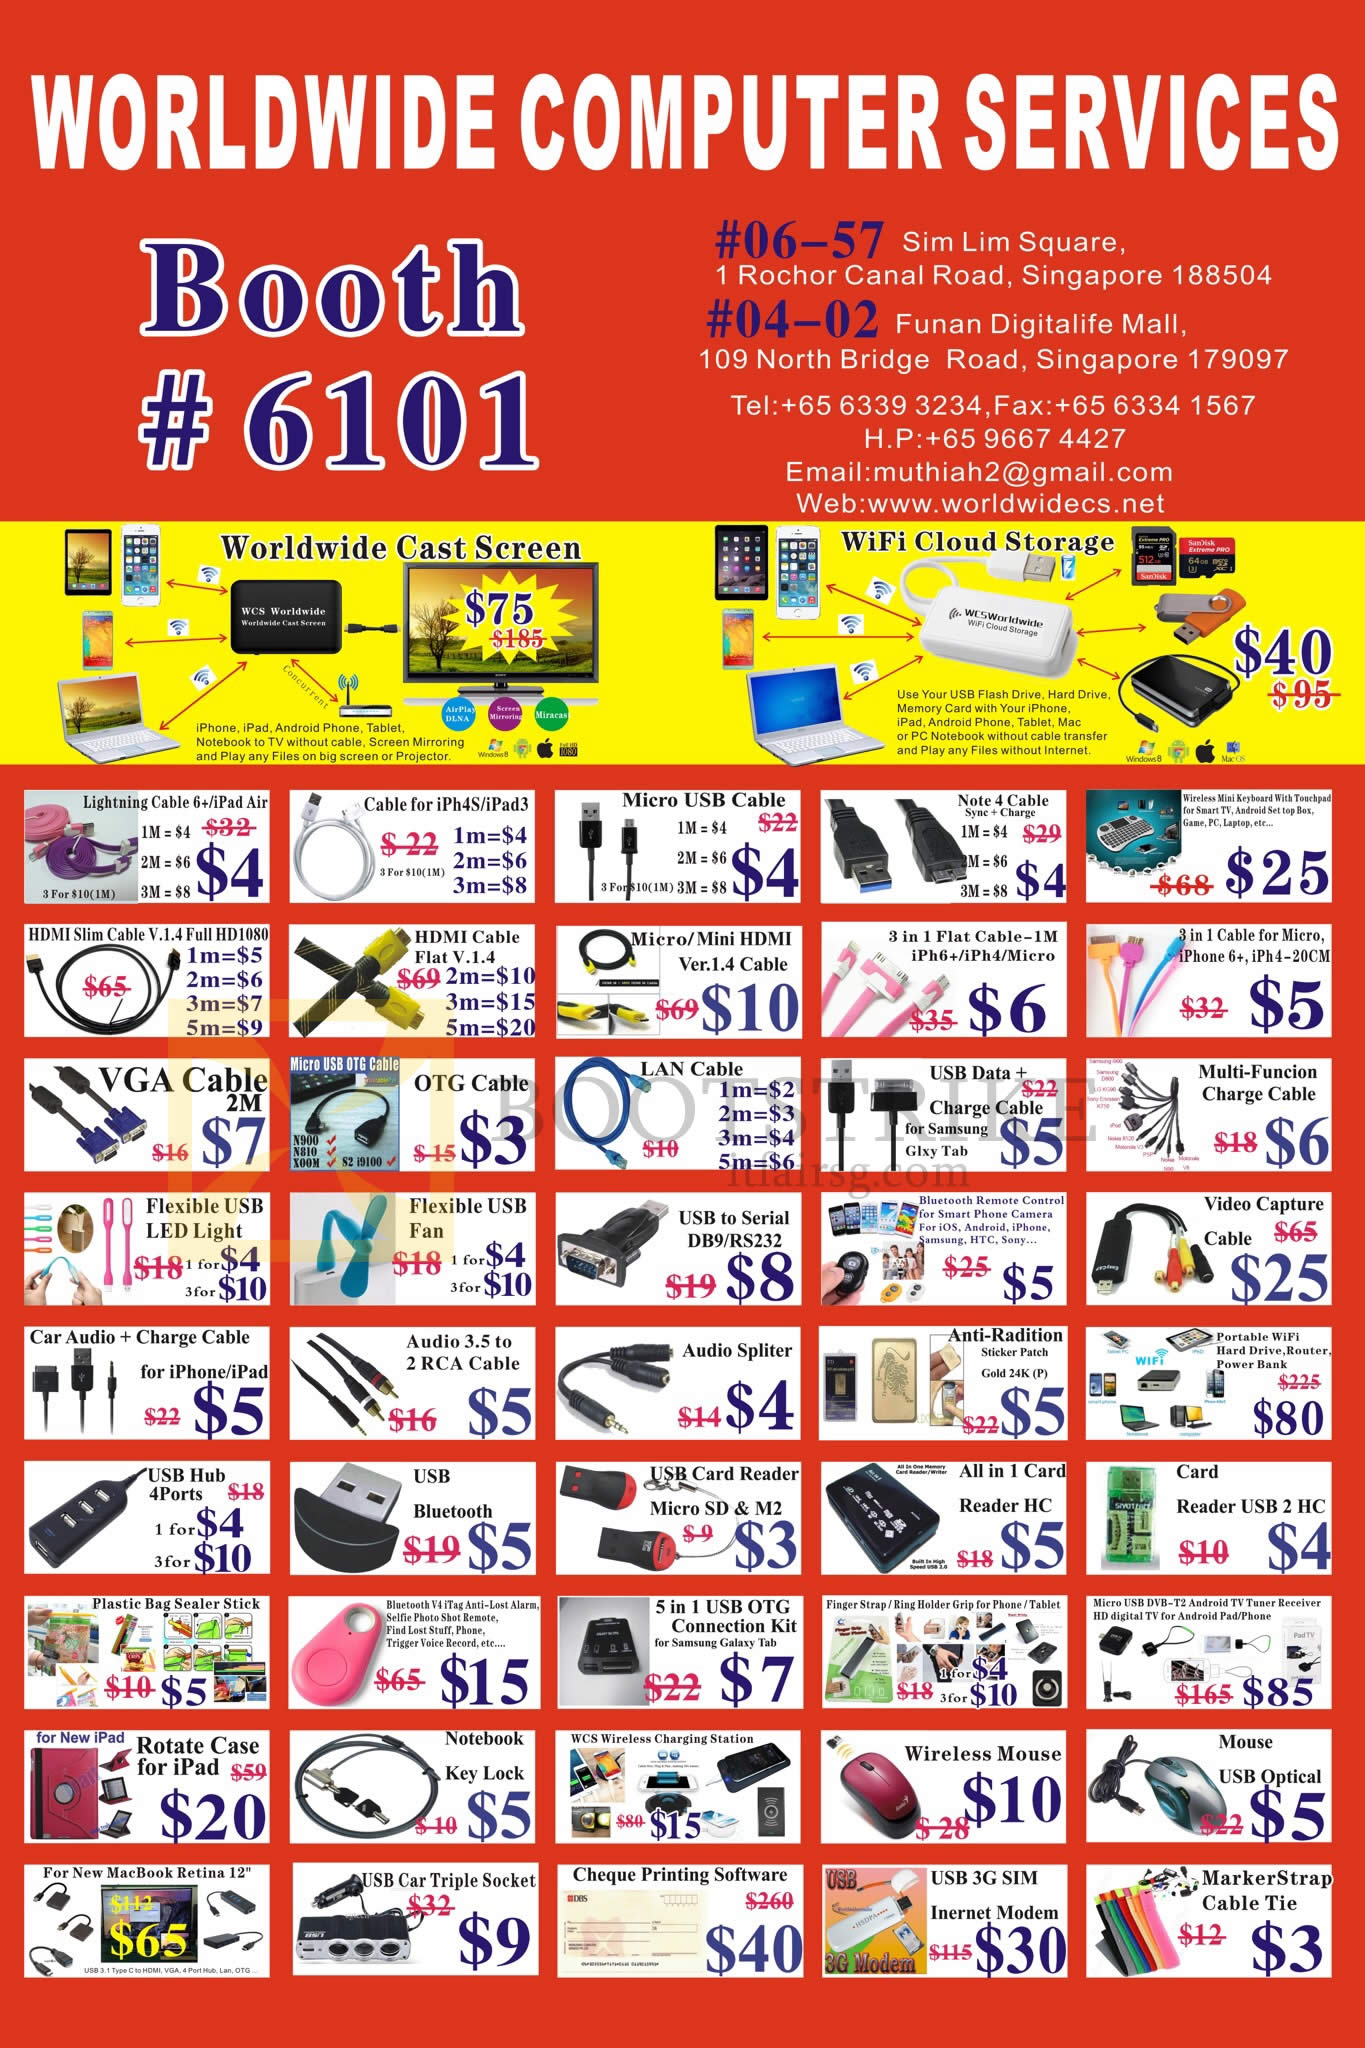 COMEX 2015 price list image brochure of Worldwide Computer Services Accessories, Cast Screen, Cloud Storage, Cables, Sockets, Mouses, Cable Ties, Cheque Printing Software